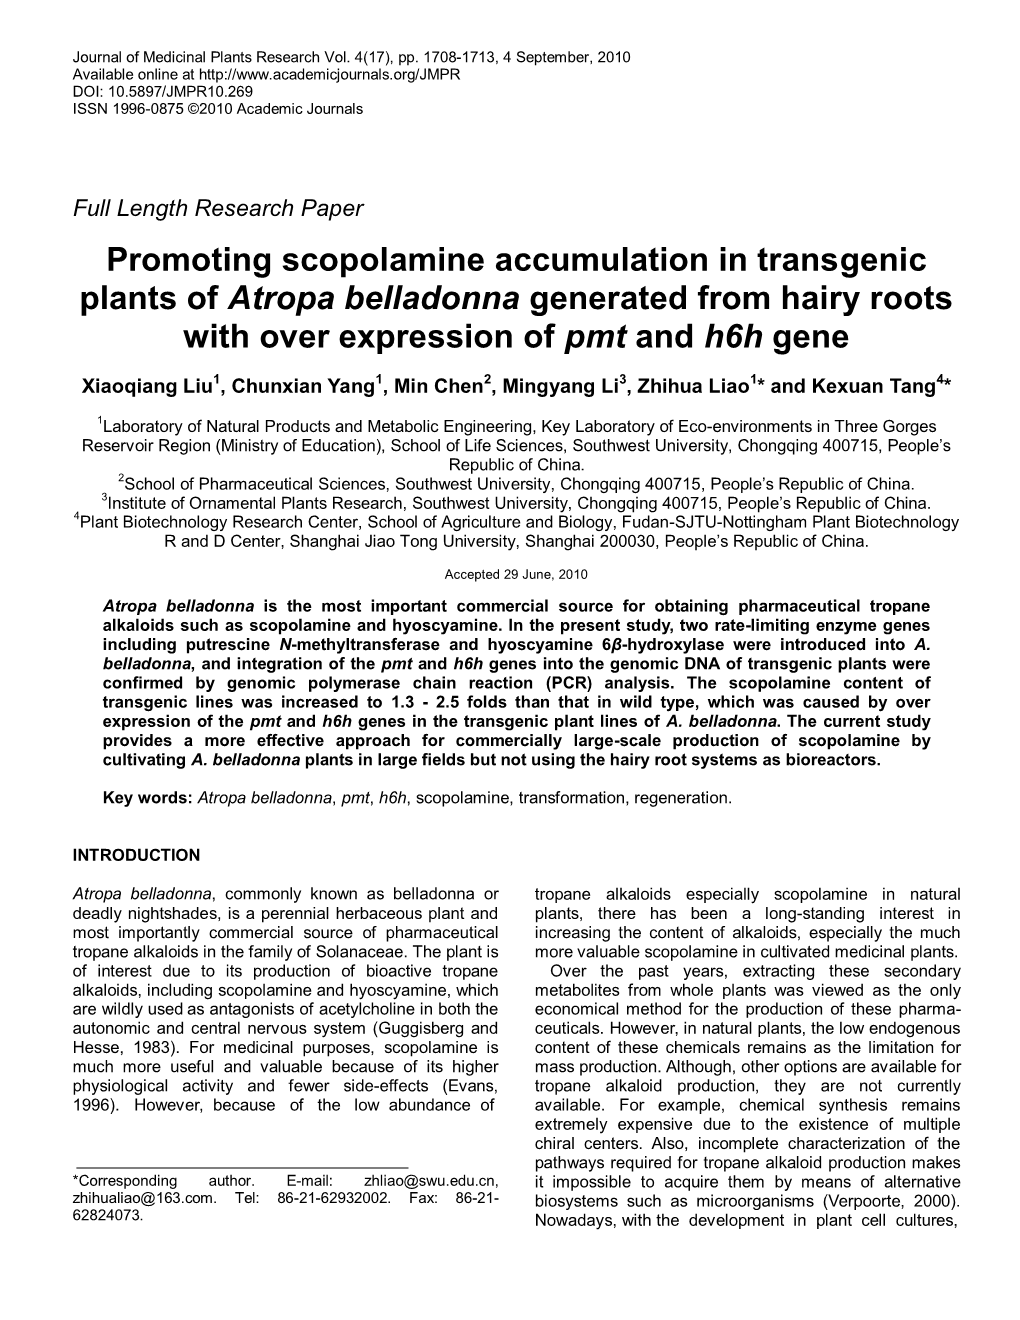 Promoting Scopolamine Accumulation in Transgenic Plants of Atropa Belladonna Generated from Hairy Roots with Over Expression of Pmt and H6h Gene